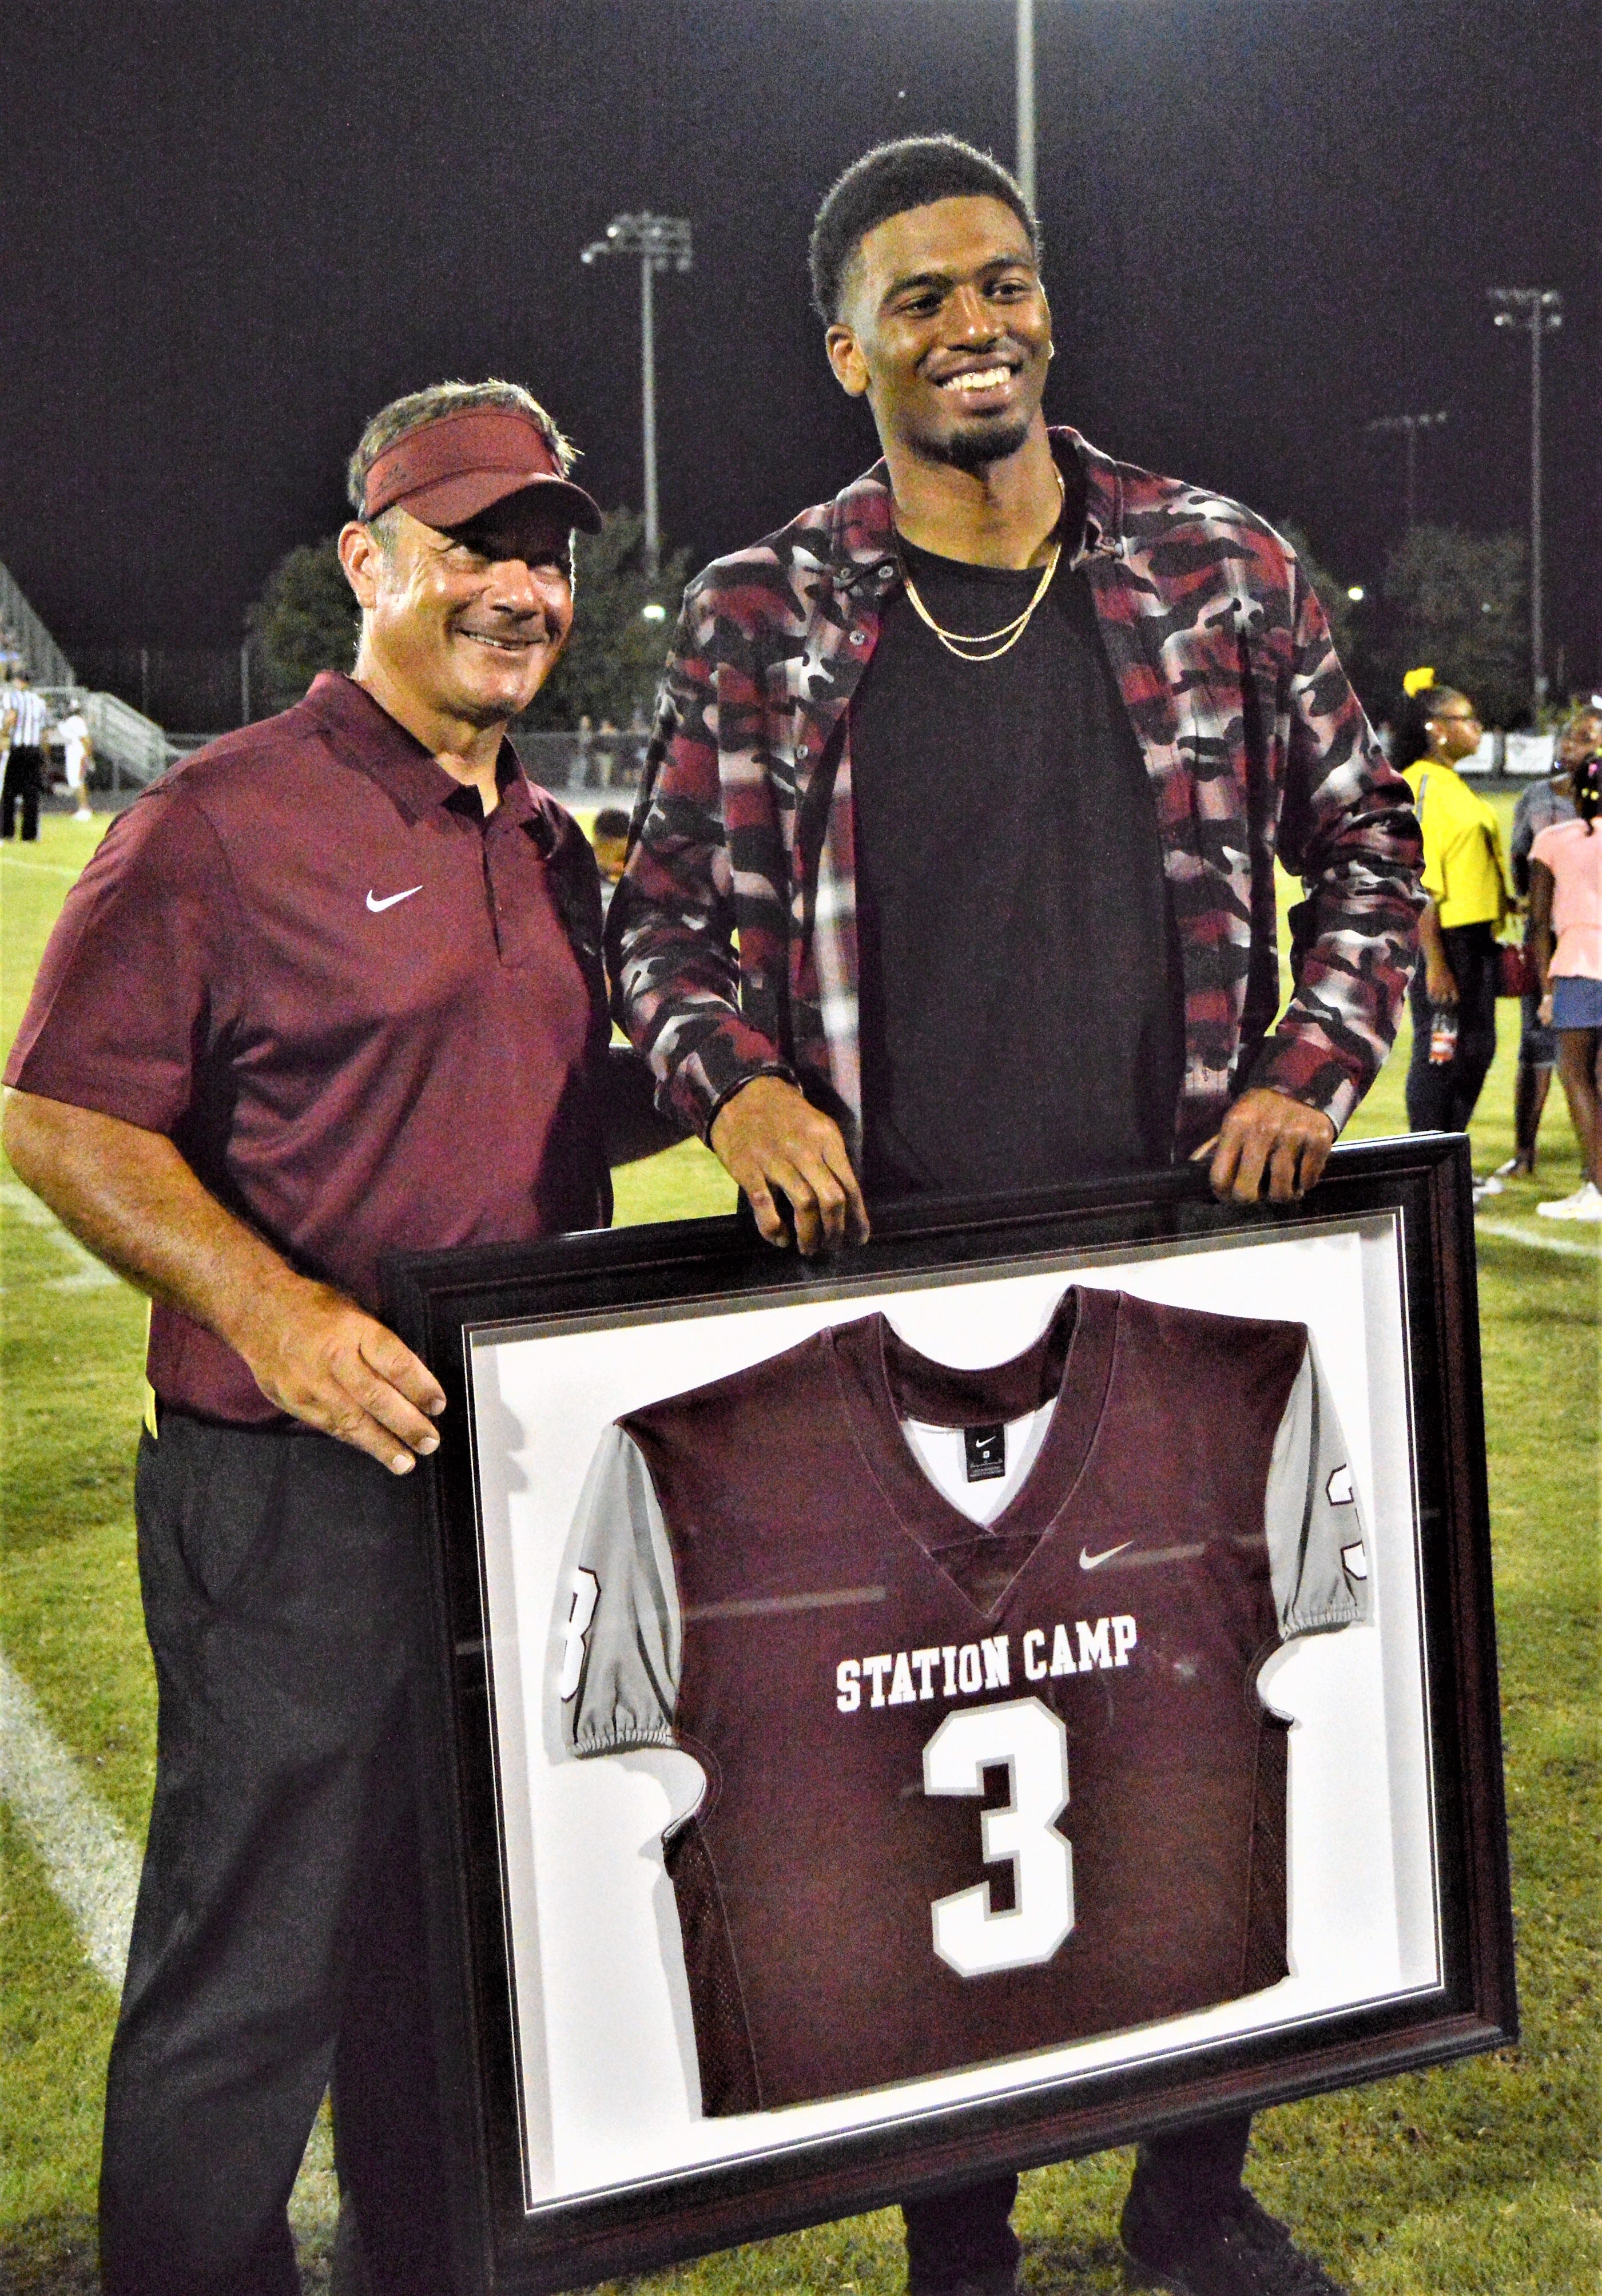 Station Camp football: Josh Malone has his jersey retired